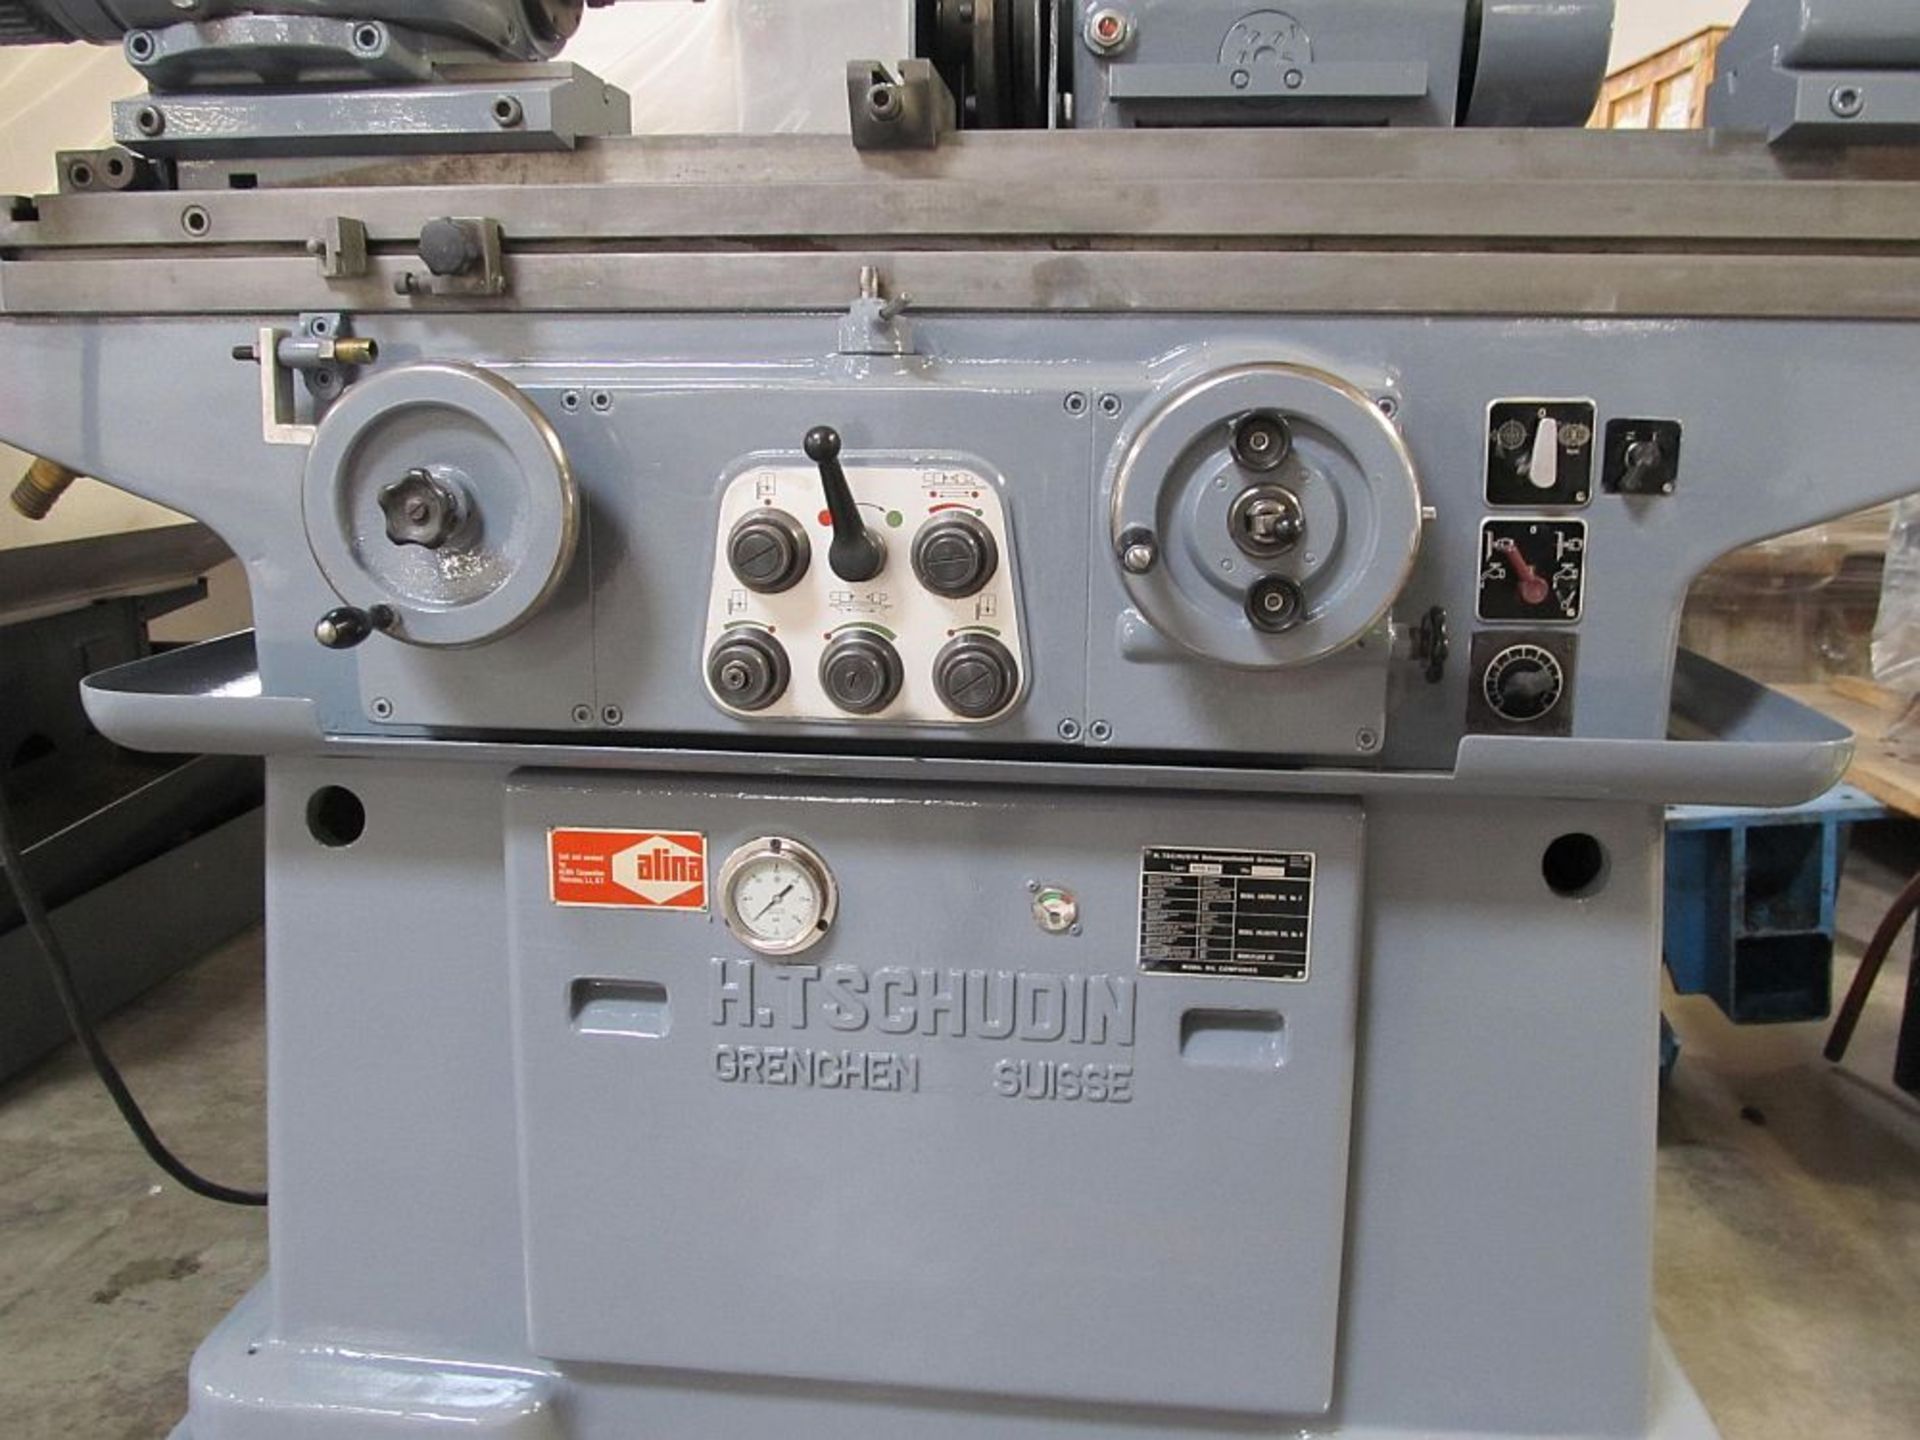 8" x 24" Tschudin HTG-600 Precision Universal ID/OD Cylindrical Grinder, Swing-down ID grinding - Image 6 of 9